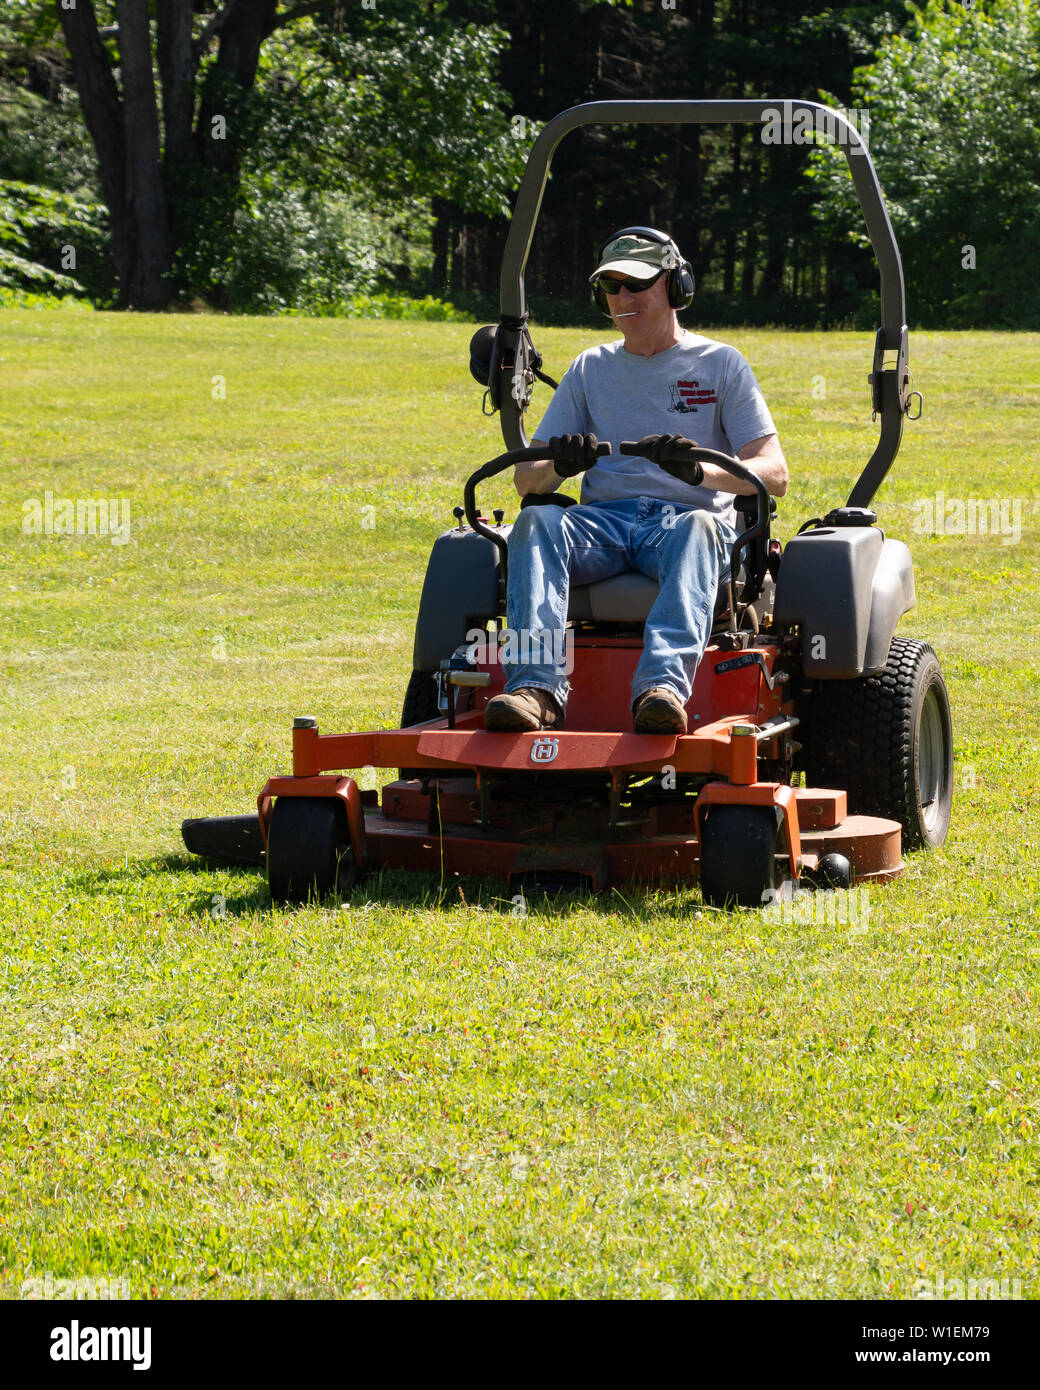 A male worker mowing a lawn with a commercial lawn mower in Speculator, NY USA Stock Photo